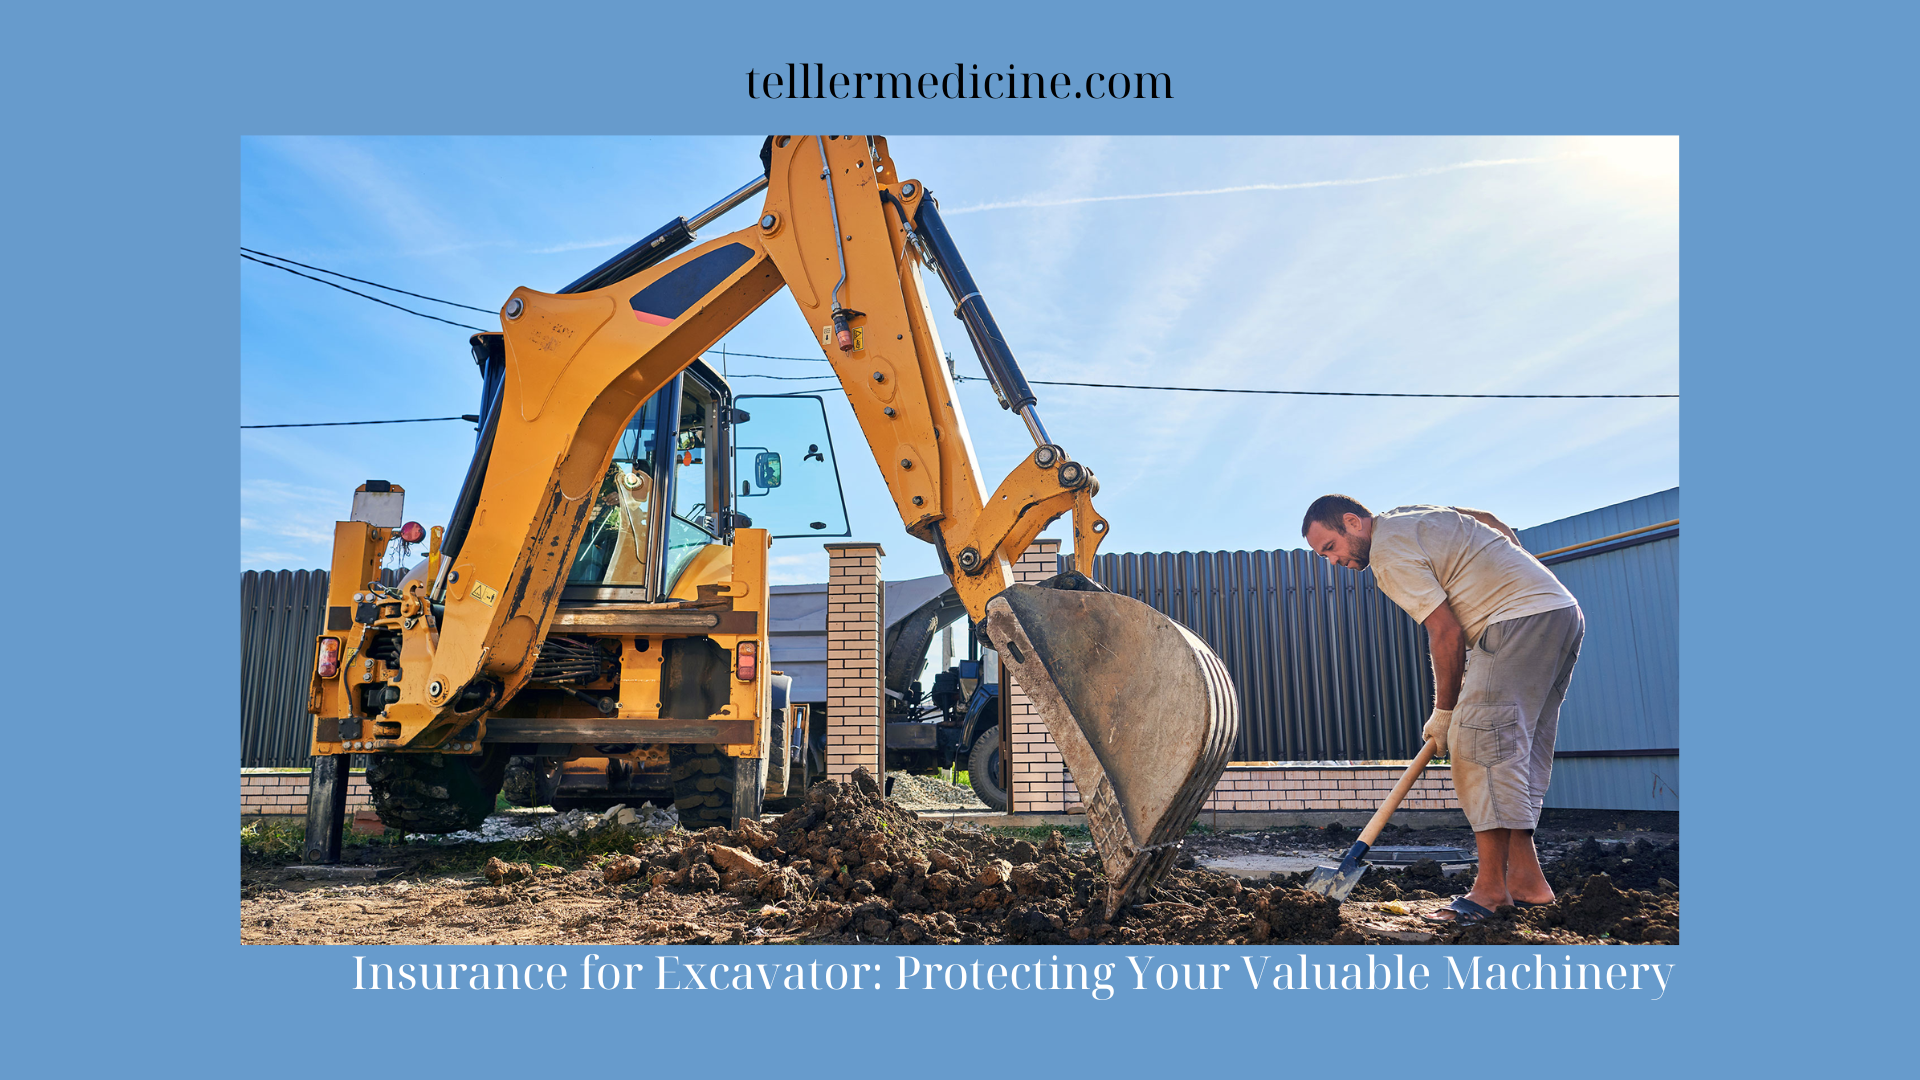 Insurance for Excavator: Protecting Your Valuable Machinery